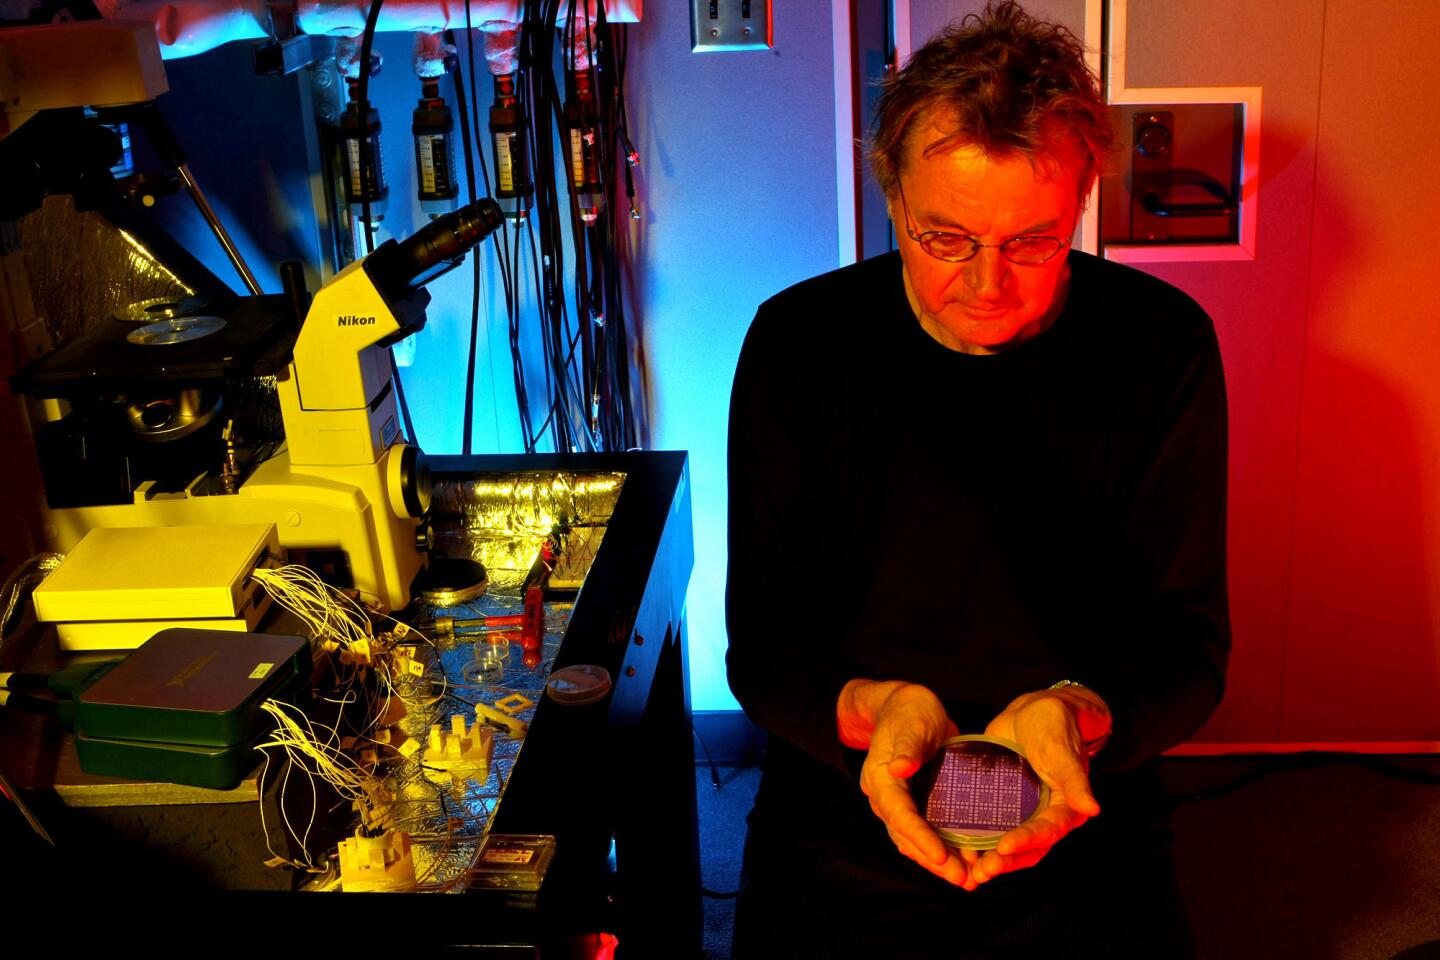 UCLA chemistry professor Jim Gimzewski holds a petri dish containing one of the chips he hopes has the computational power of the brain.